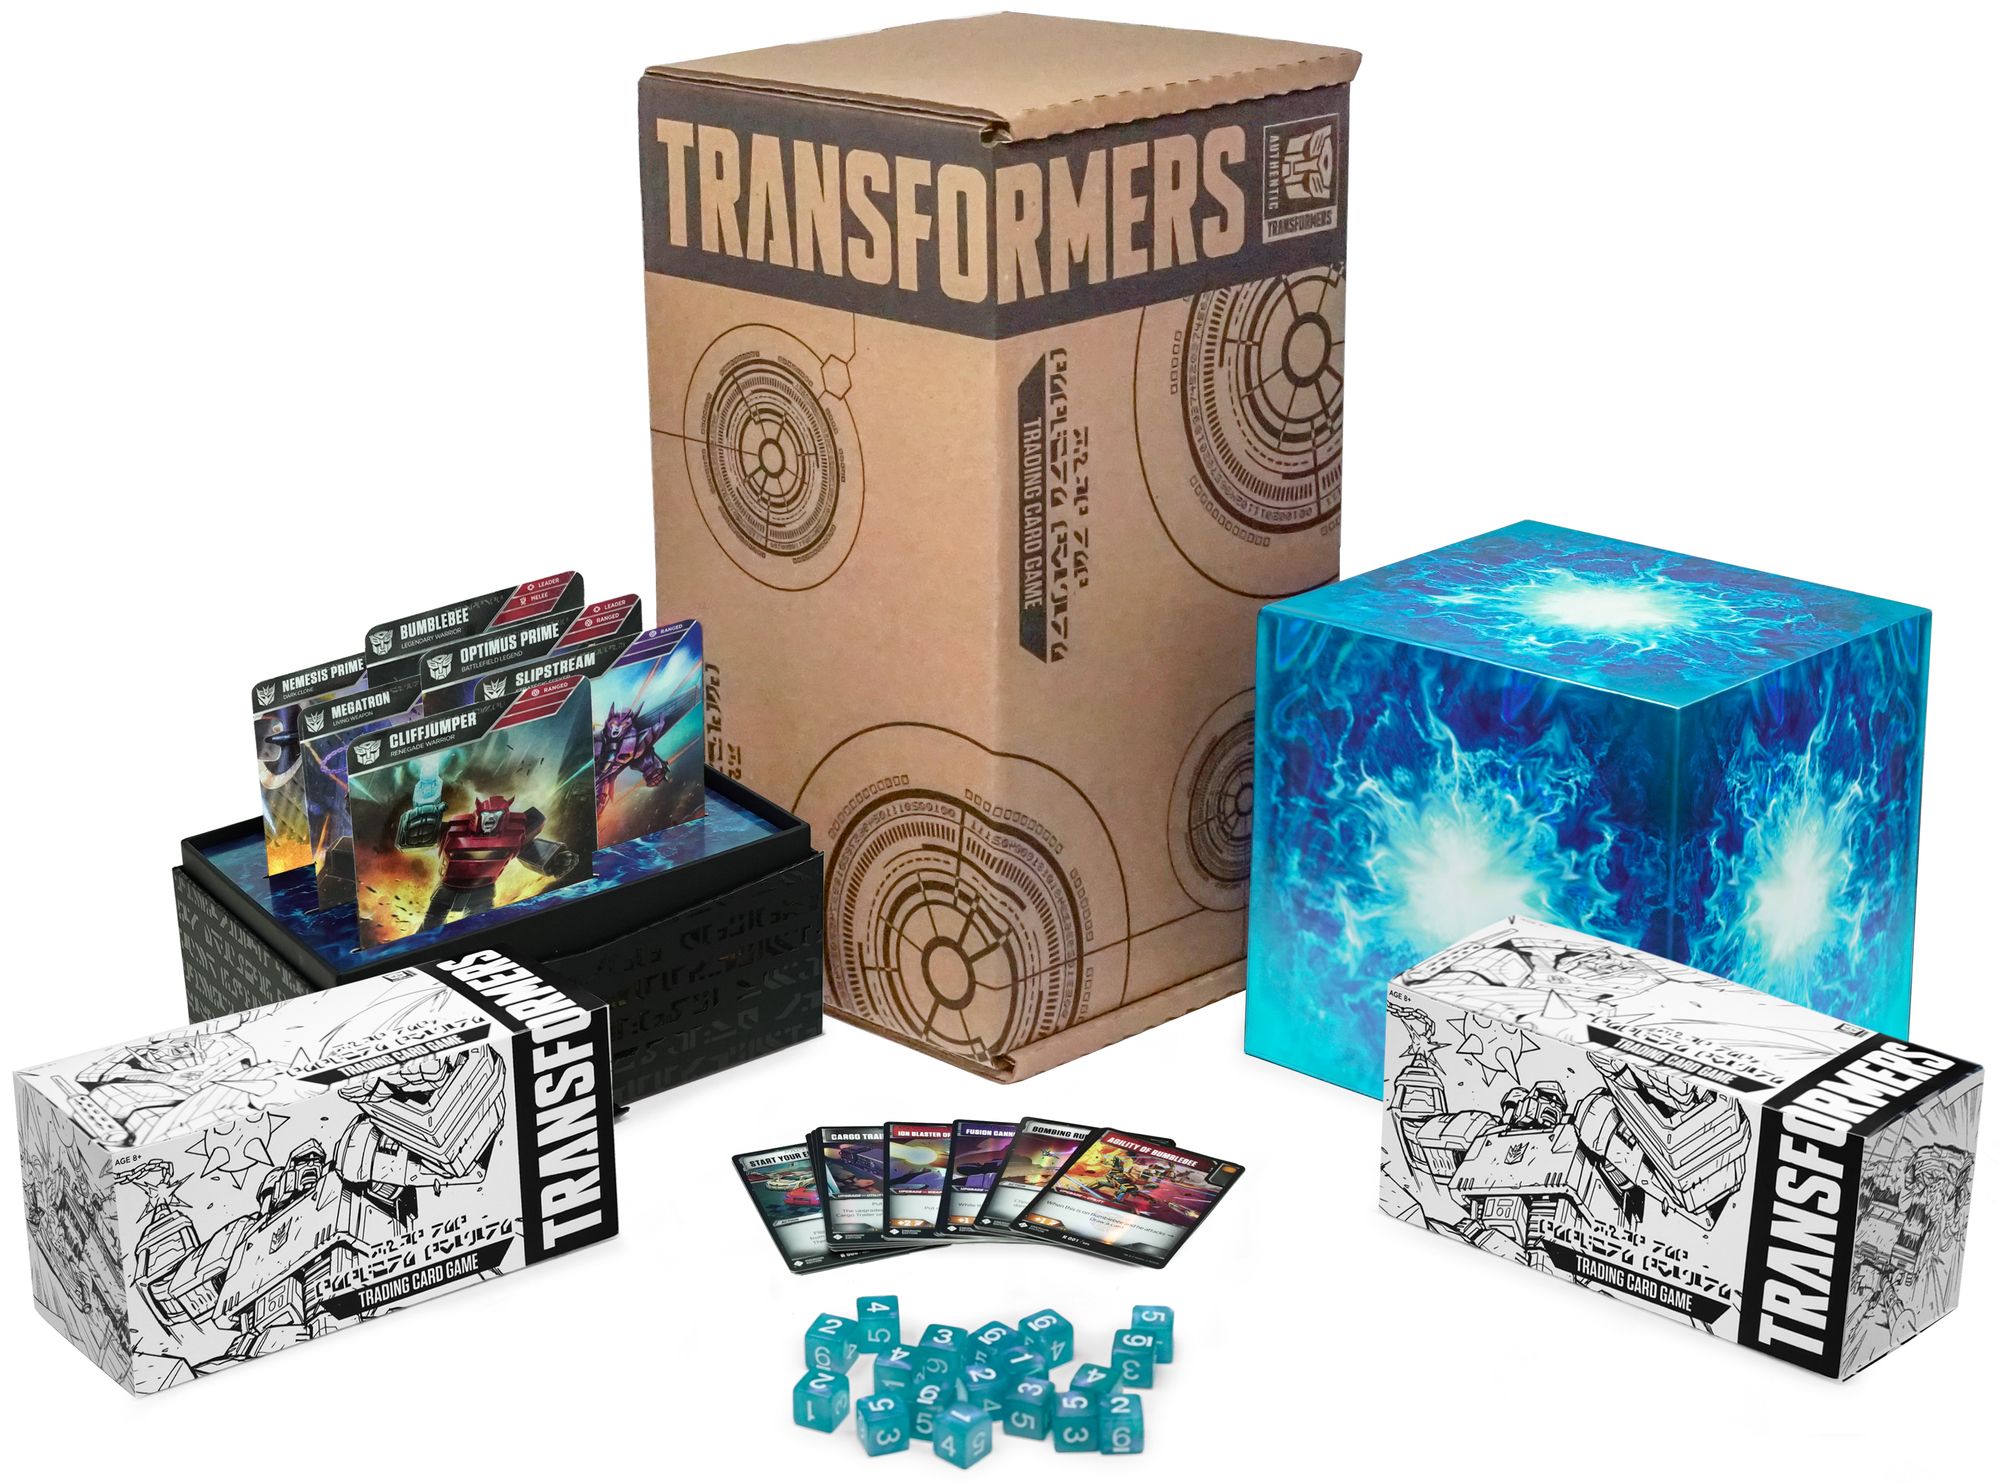 Transformers Trading Card Game: Wave One Energon Edition